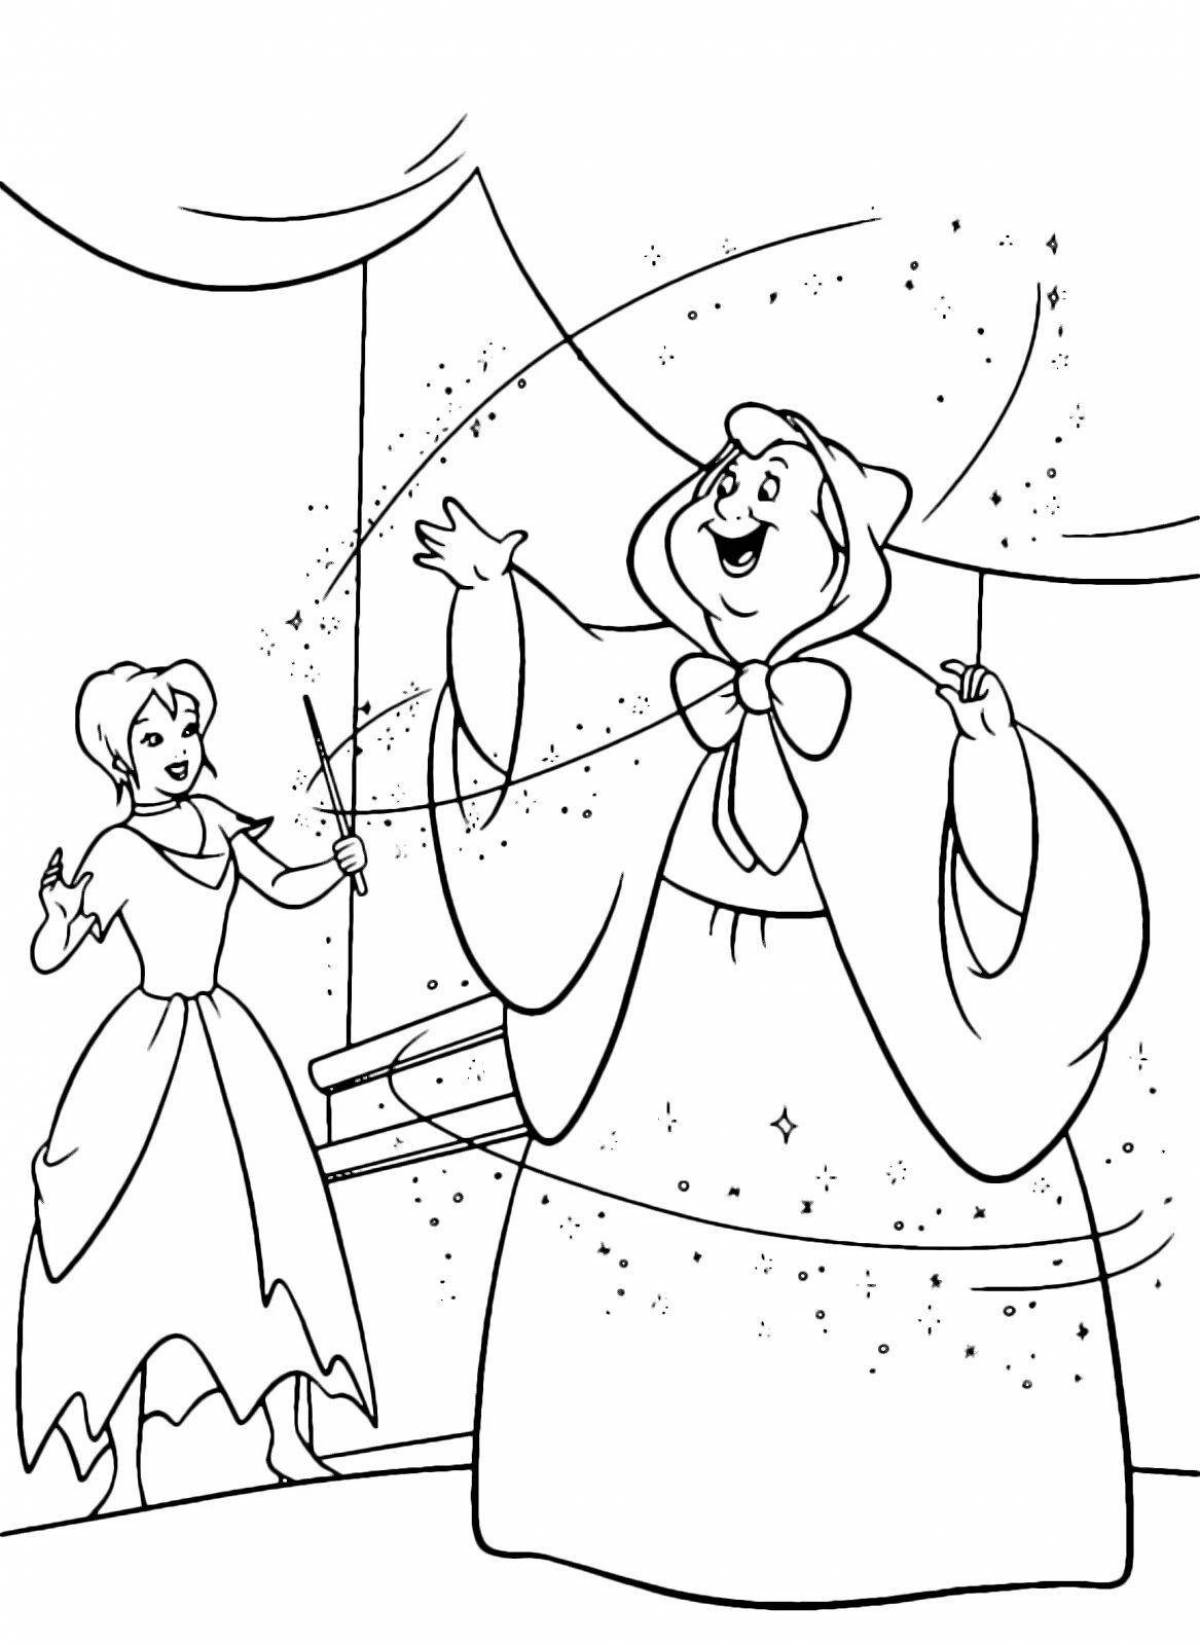 Coloring page shining lady blizzard